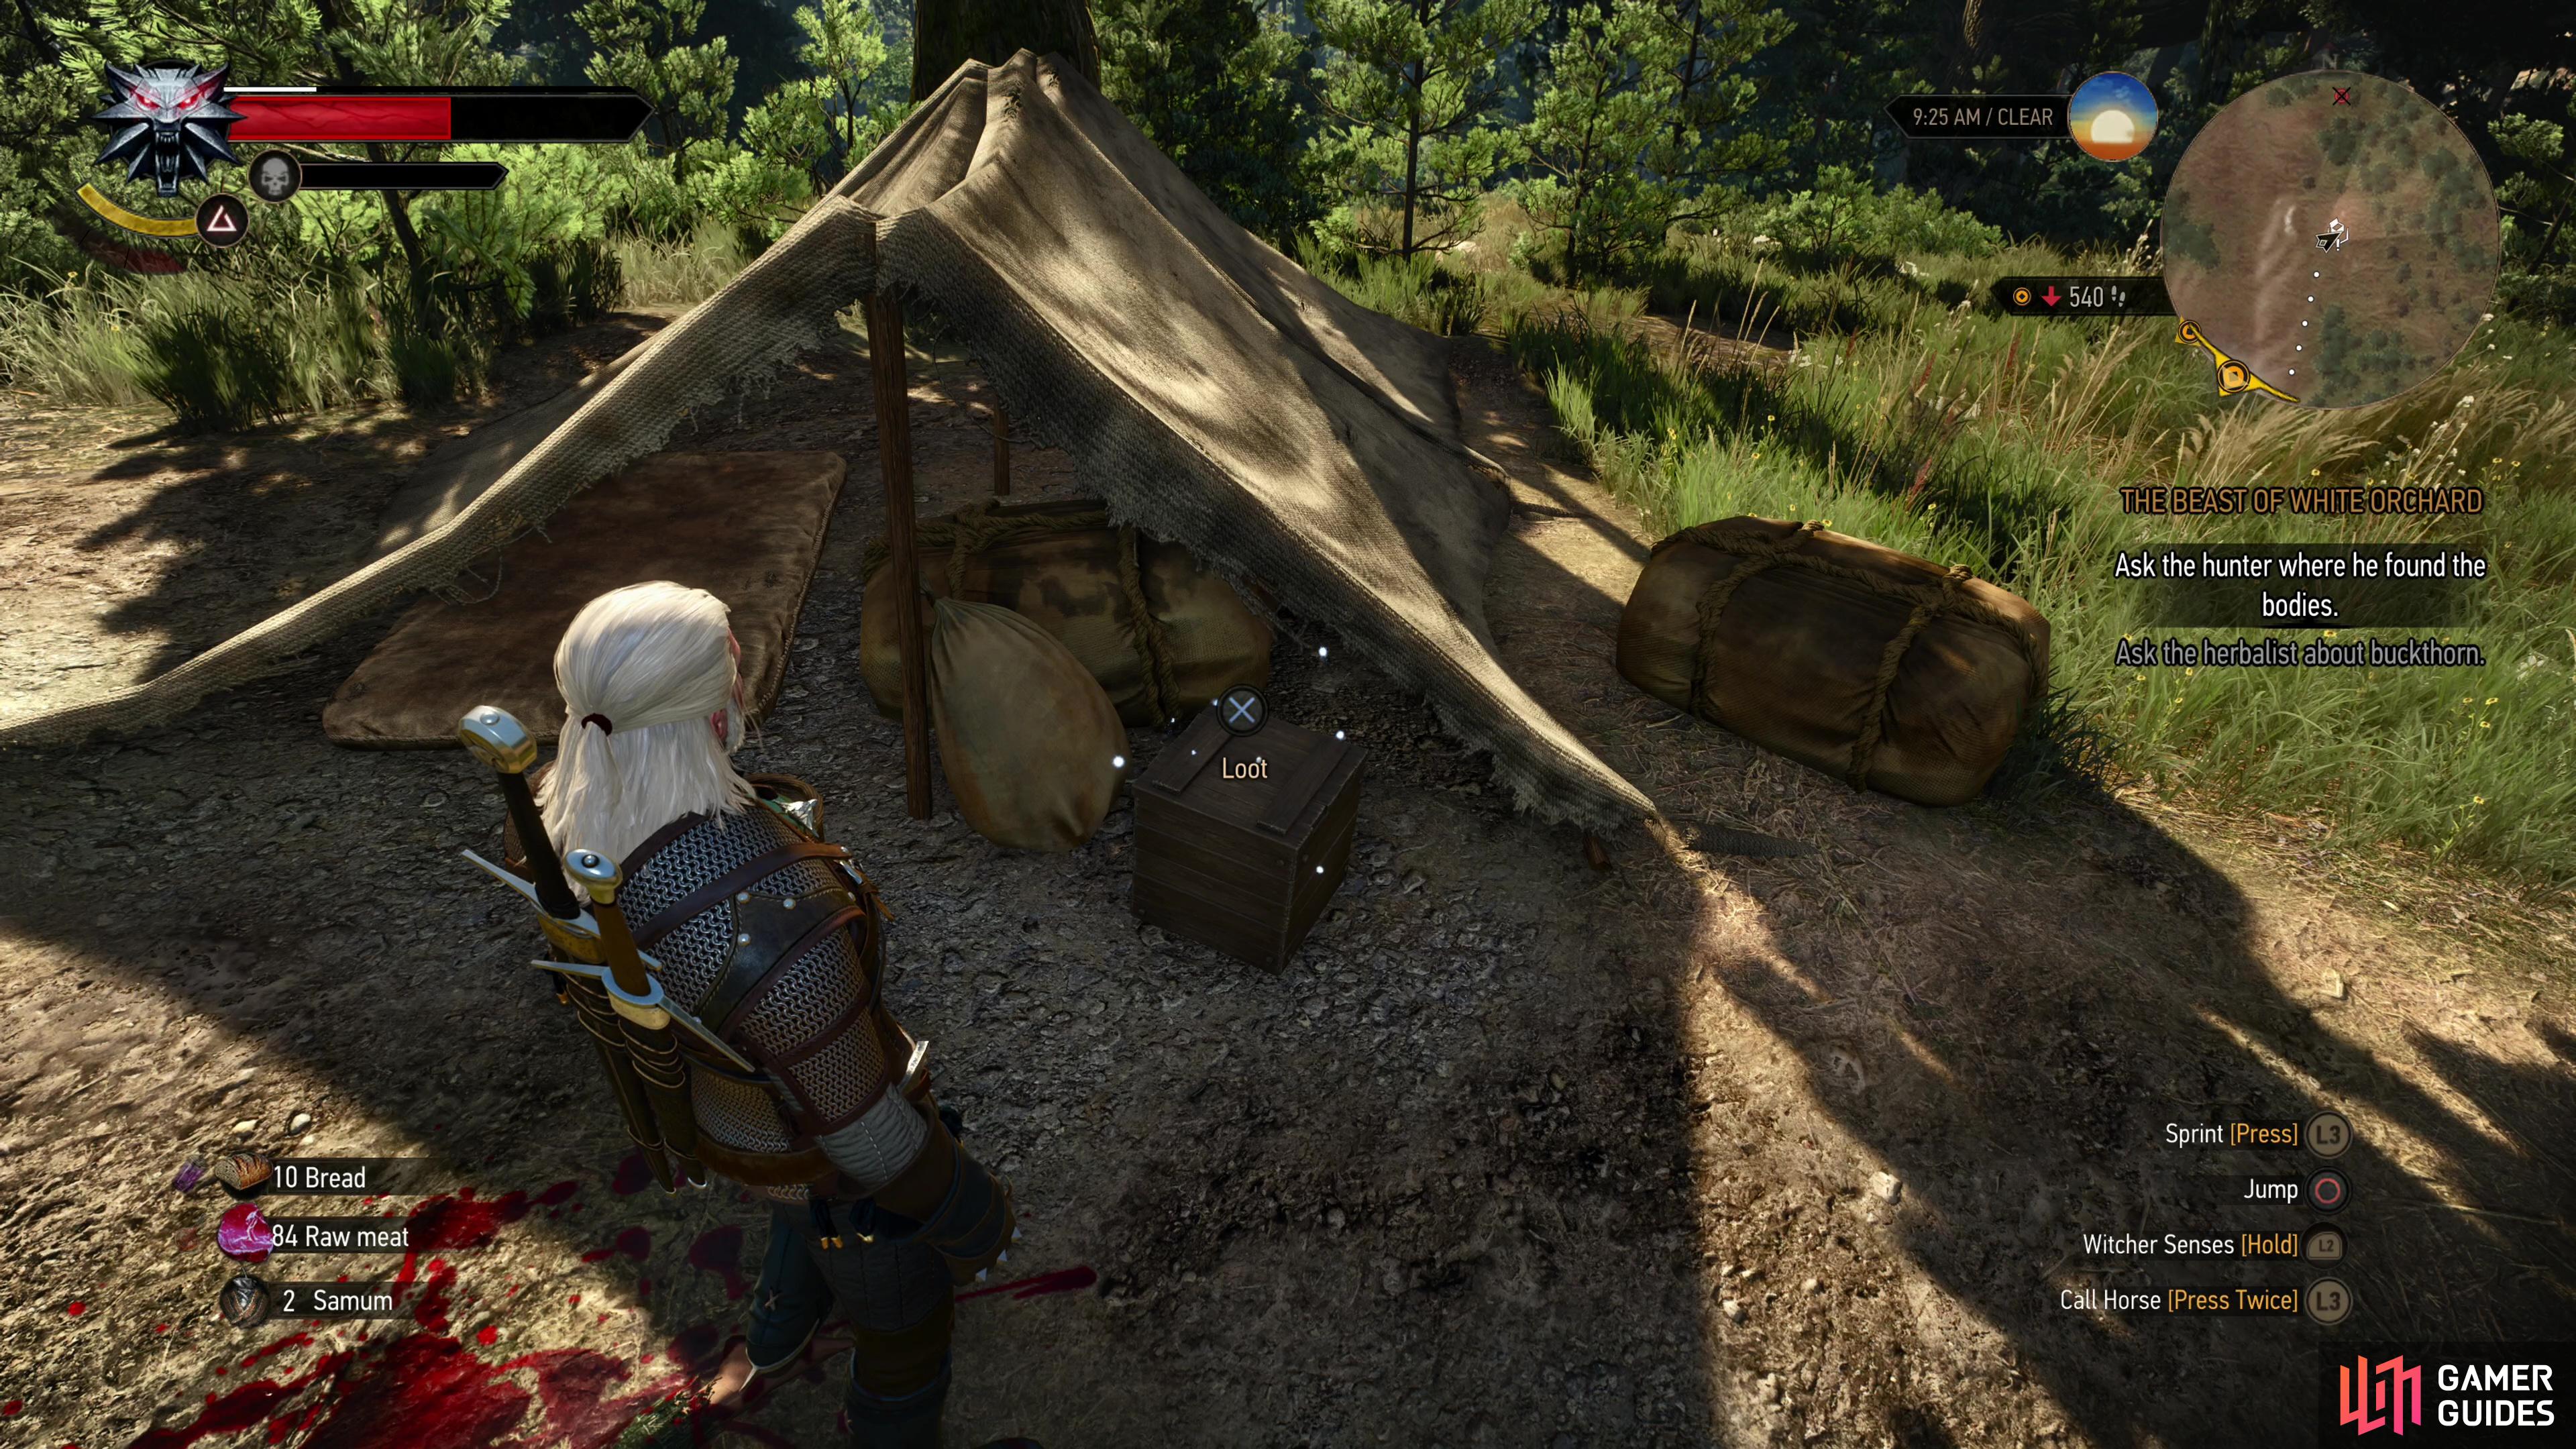 At an isolated camp you’ll find a chest containing the “Spy’s Notes”, which directs you to the same cache as in the treasure hunt “Temerian Valuables”.